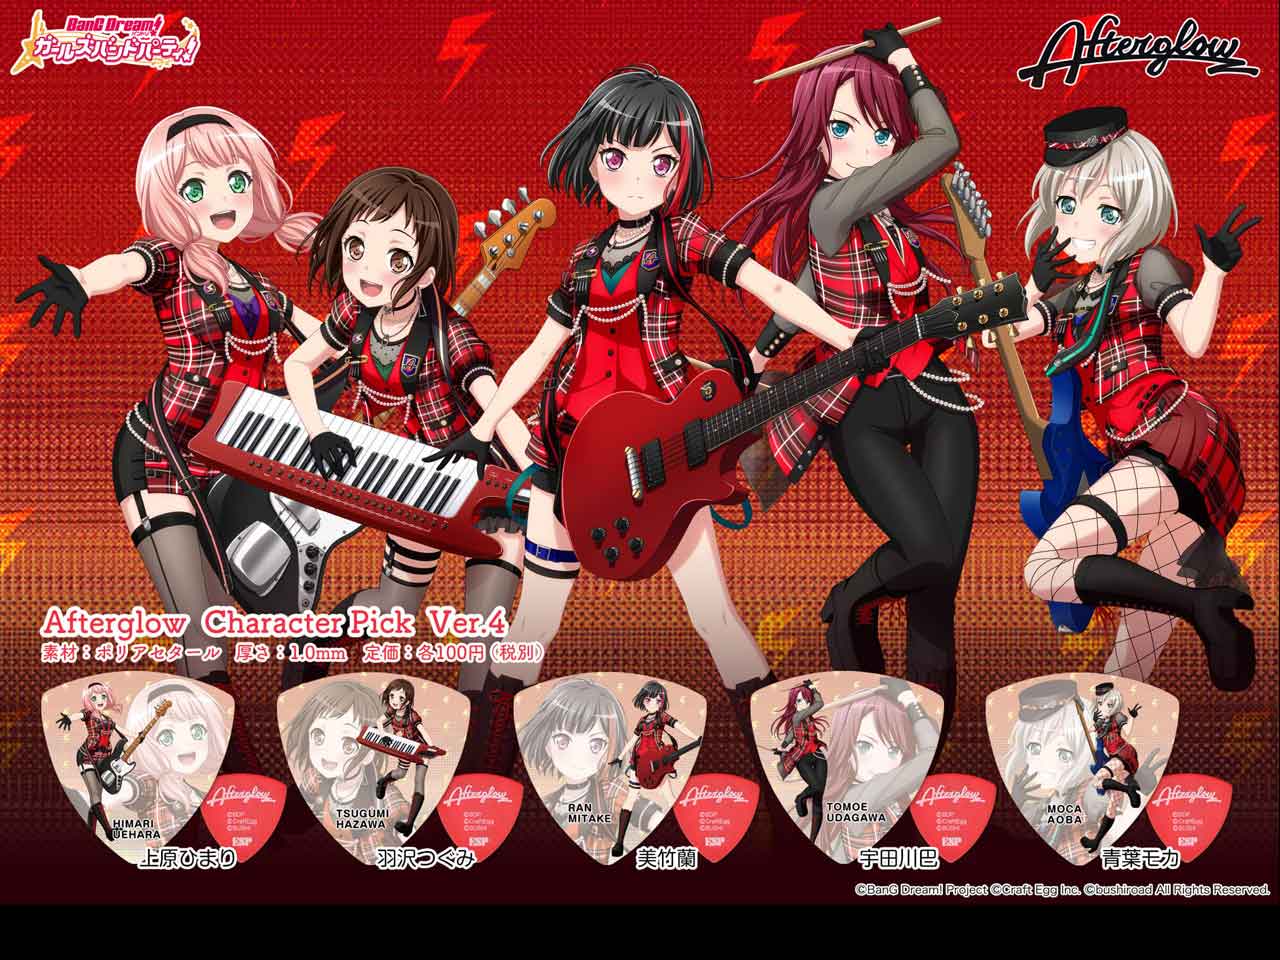 【ESP×BanG Dream!コラボピック】Afterglow Character Pick Ver.4 "美竹蘭"10枚セット（GBP RAN AFTERGLOW 4）